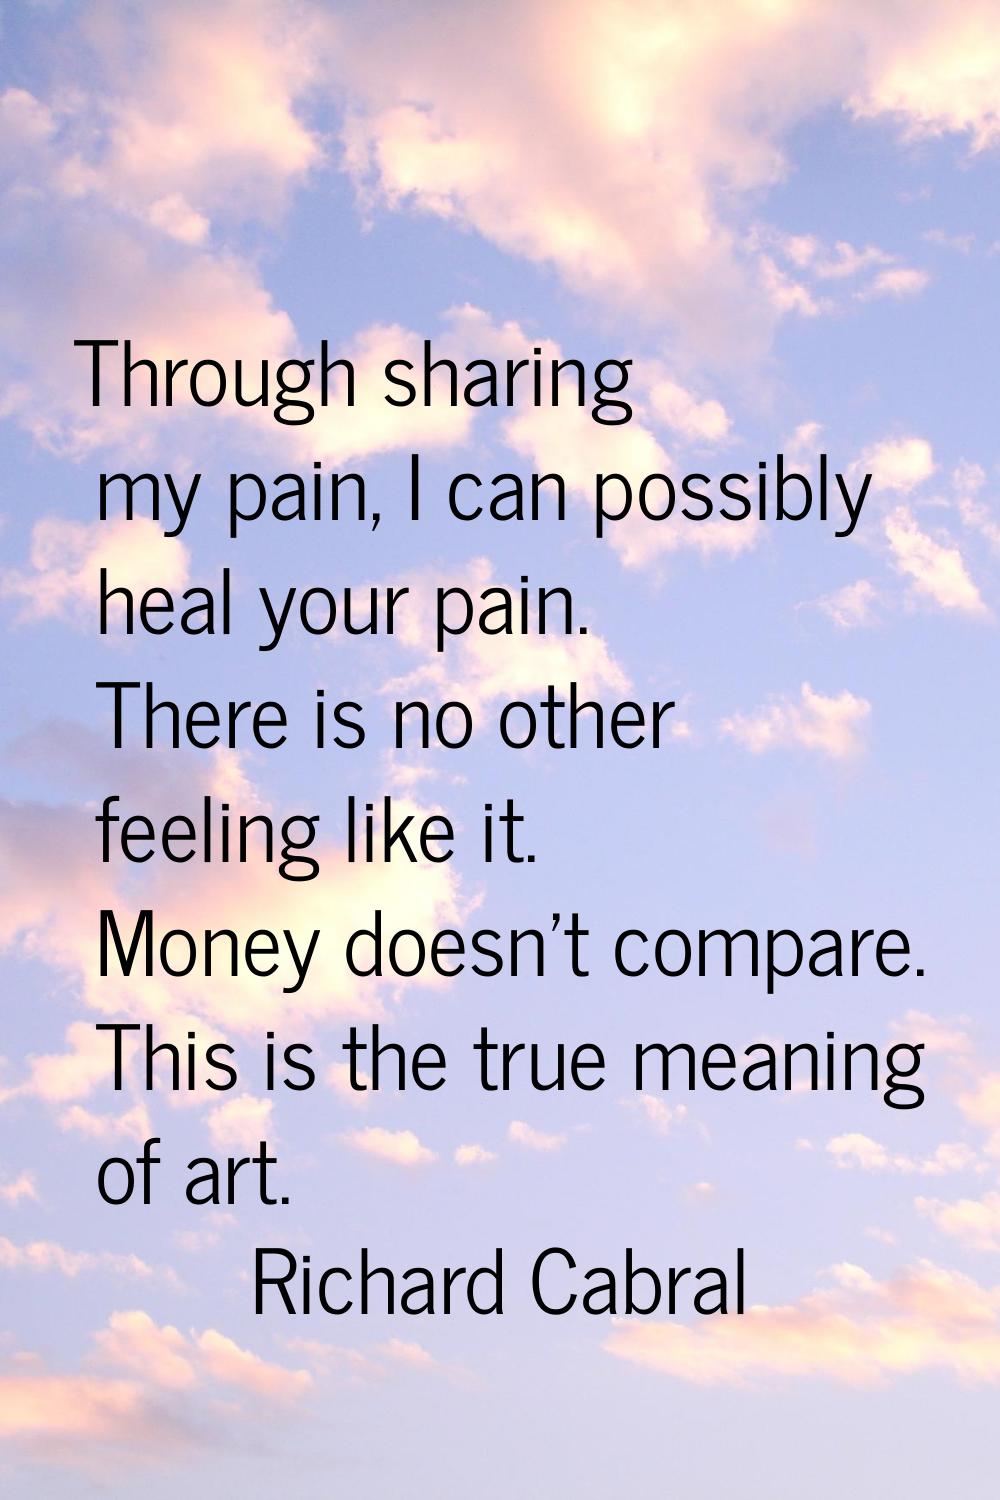 Through sharing my pain, I can possibly heal your pain. There is no other feeling like it. Money do